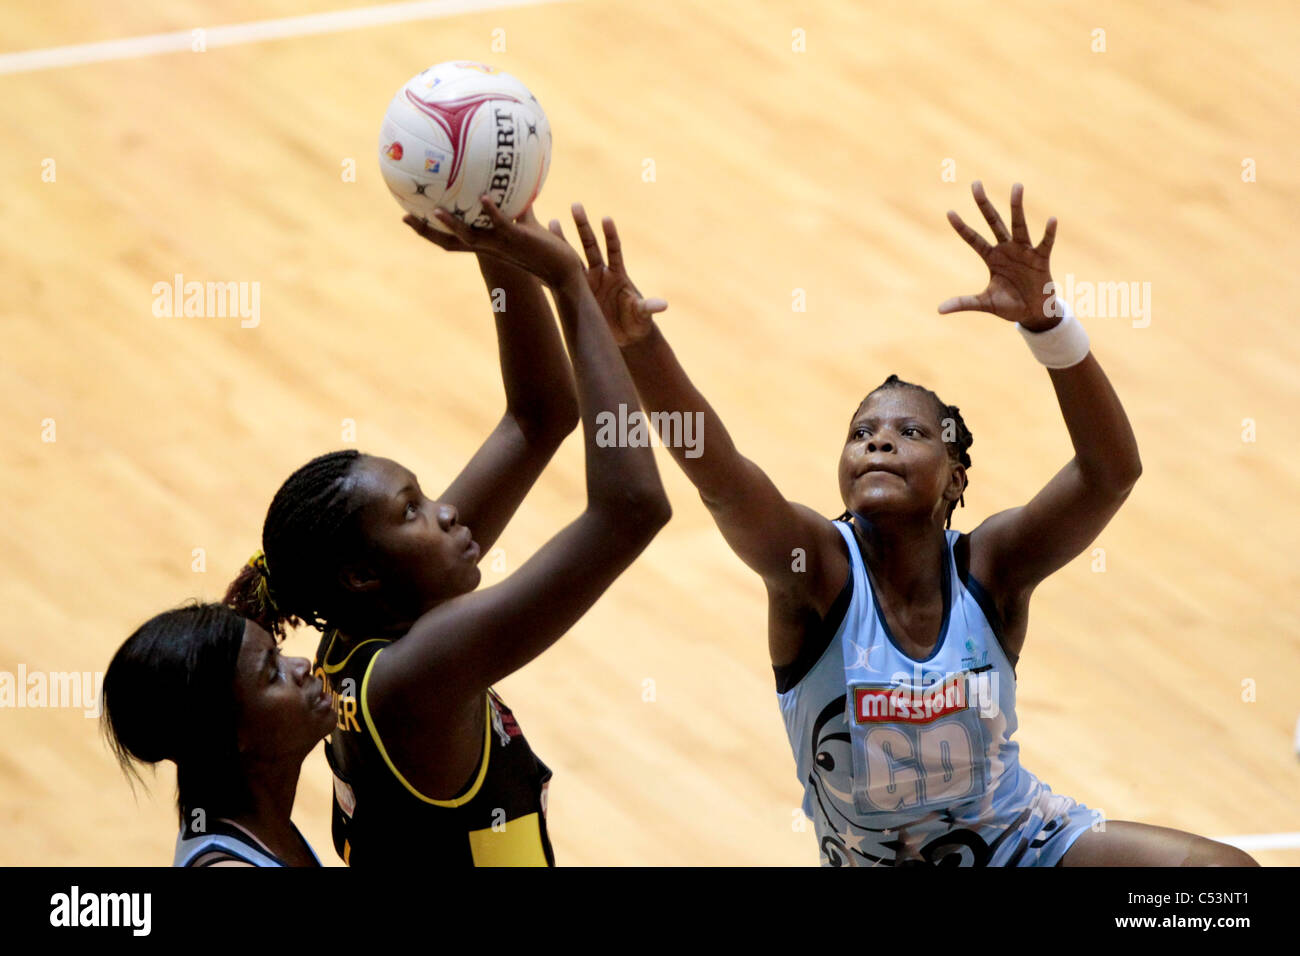 05.07.2011 Ntebogang Motlakaleso of Botswana(right) attempts to block Jhaniele Fowler during the Pool C match between Jamaica and Botswana, Mission Foods World Netball Championships 2011 from the Singapore Indoor Stadium in Singapore. Stock Photo